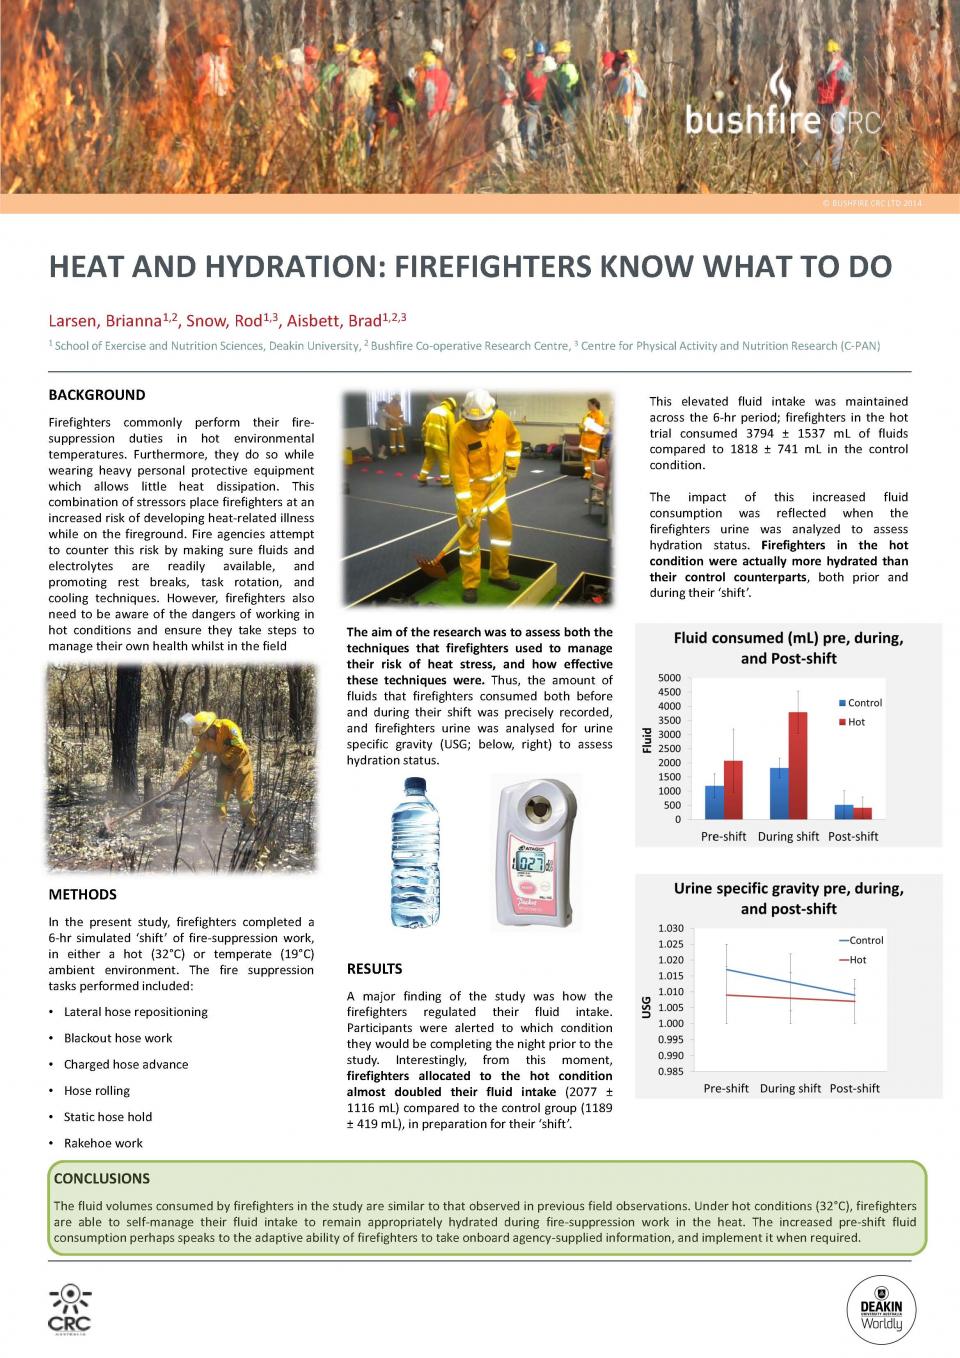 Heat and hydration: Firefighters know what to do